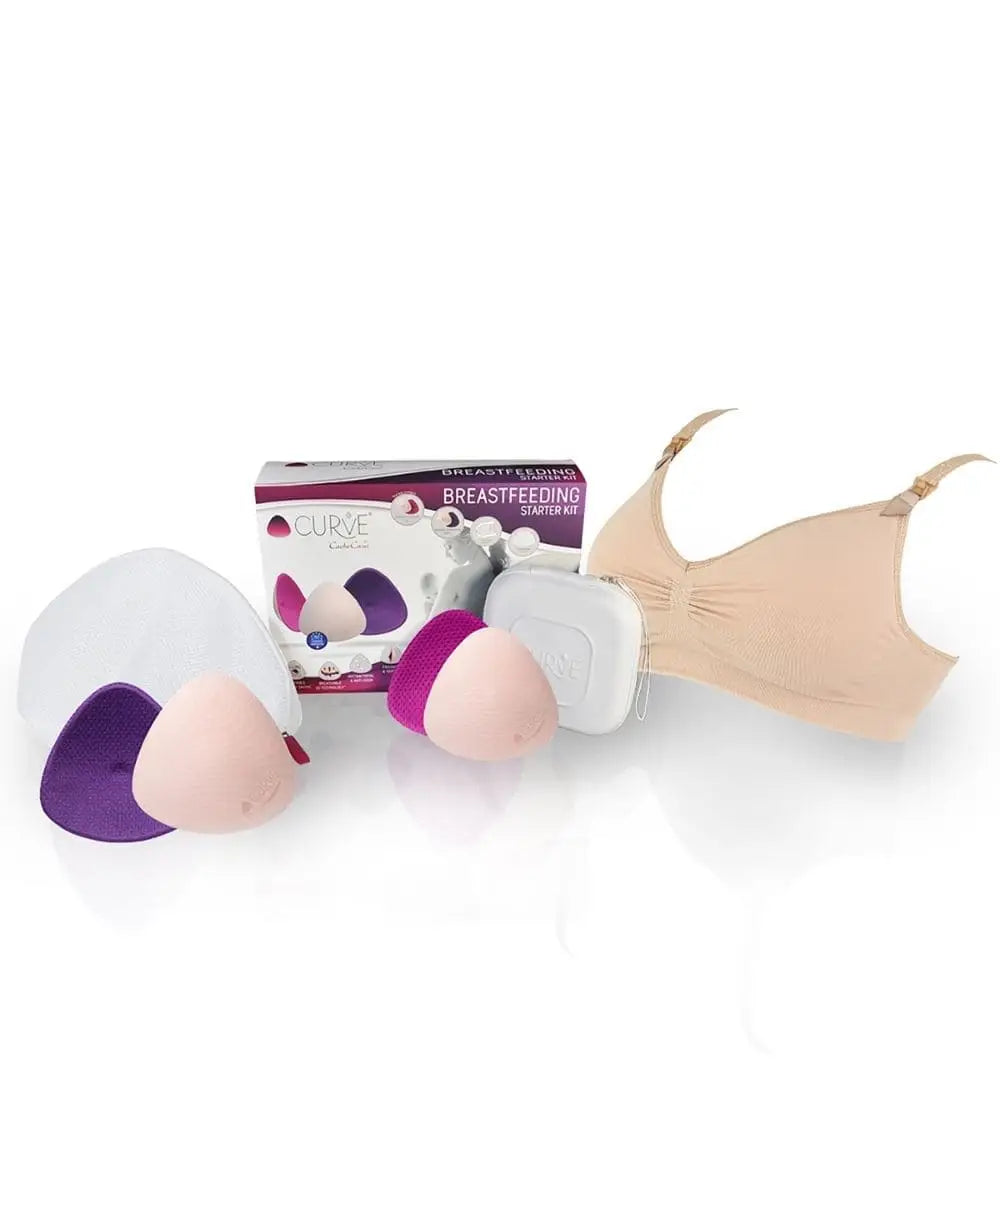 Cache Coeur Small Curve Breastfeeding Starter Kit in Nude